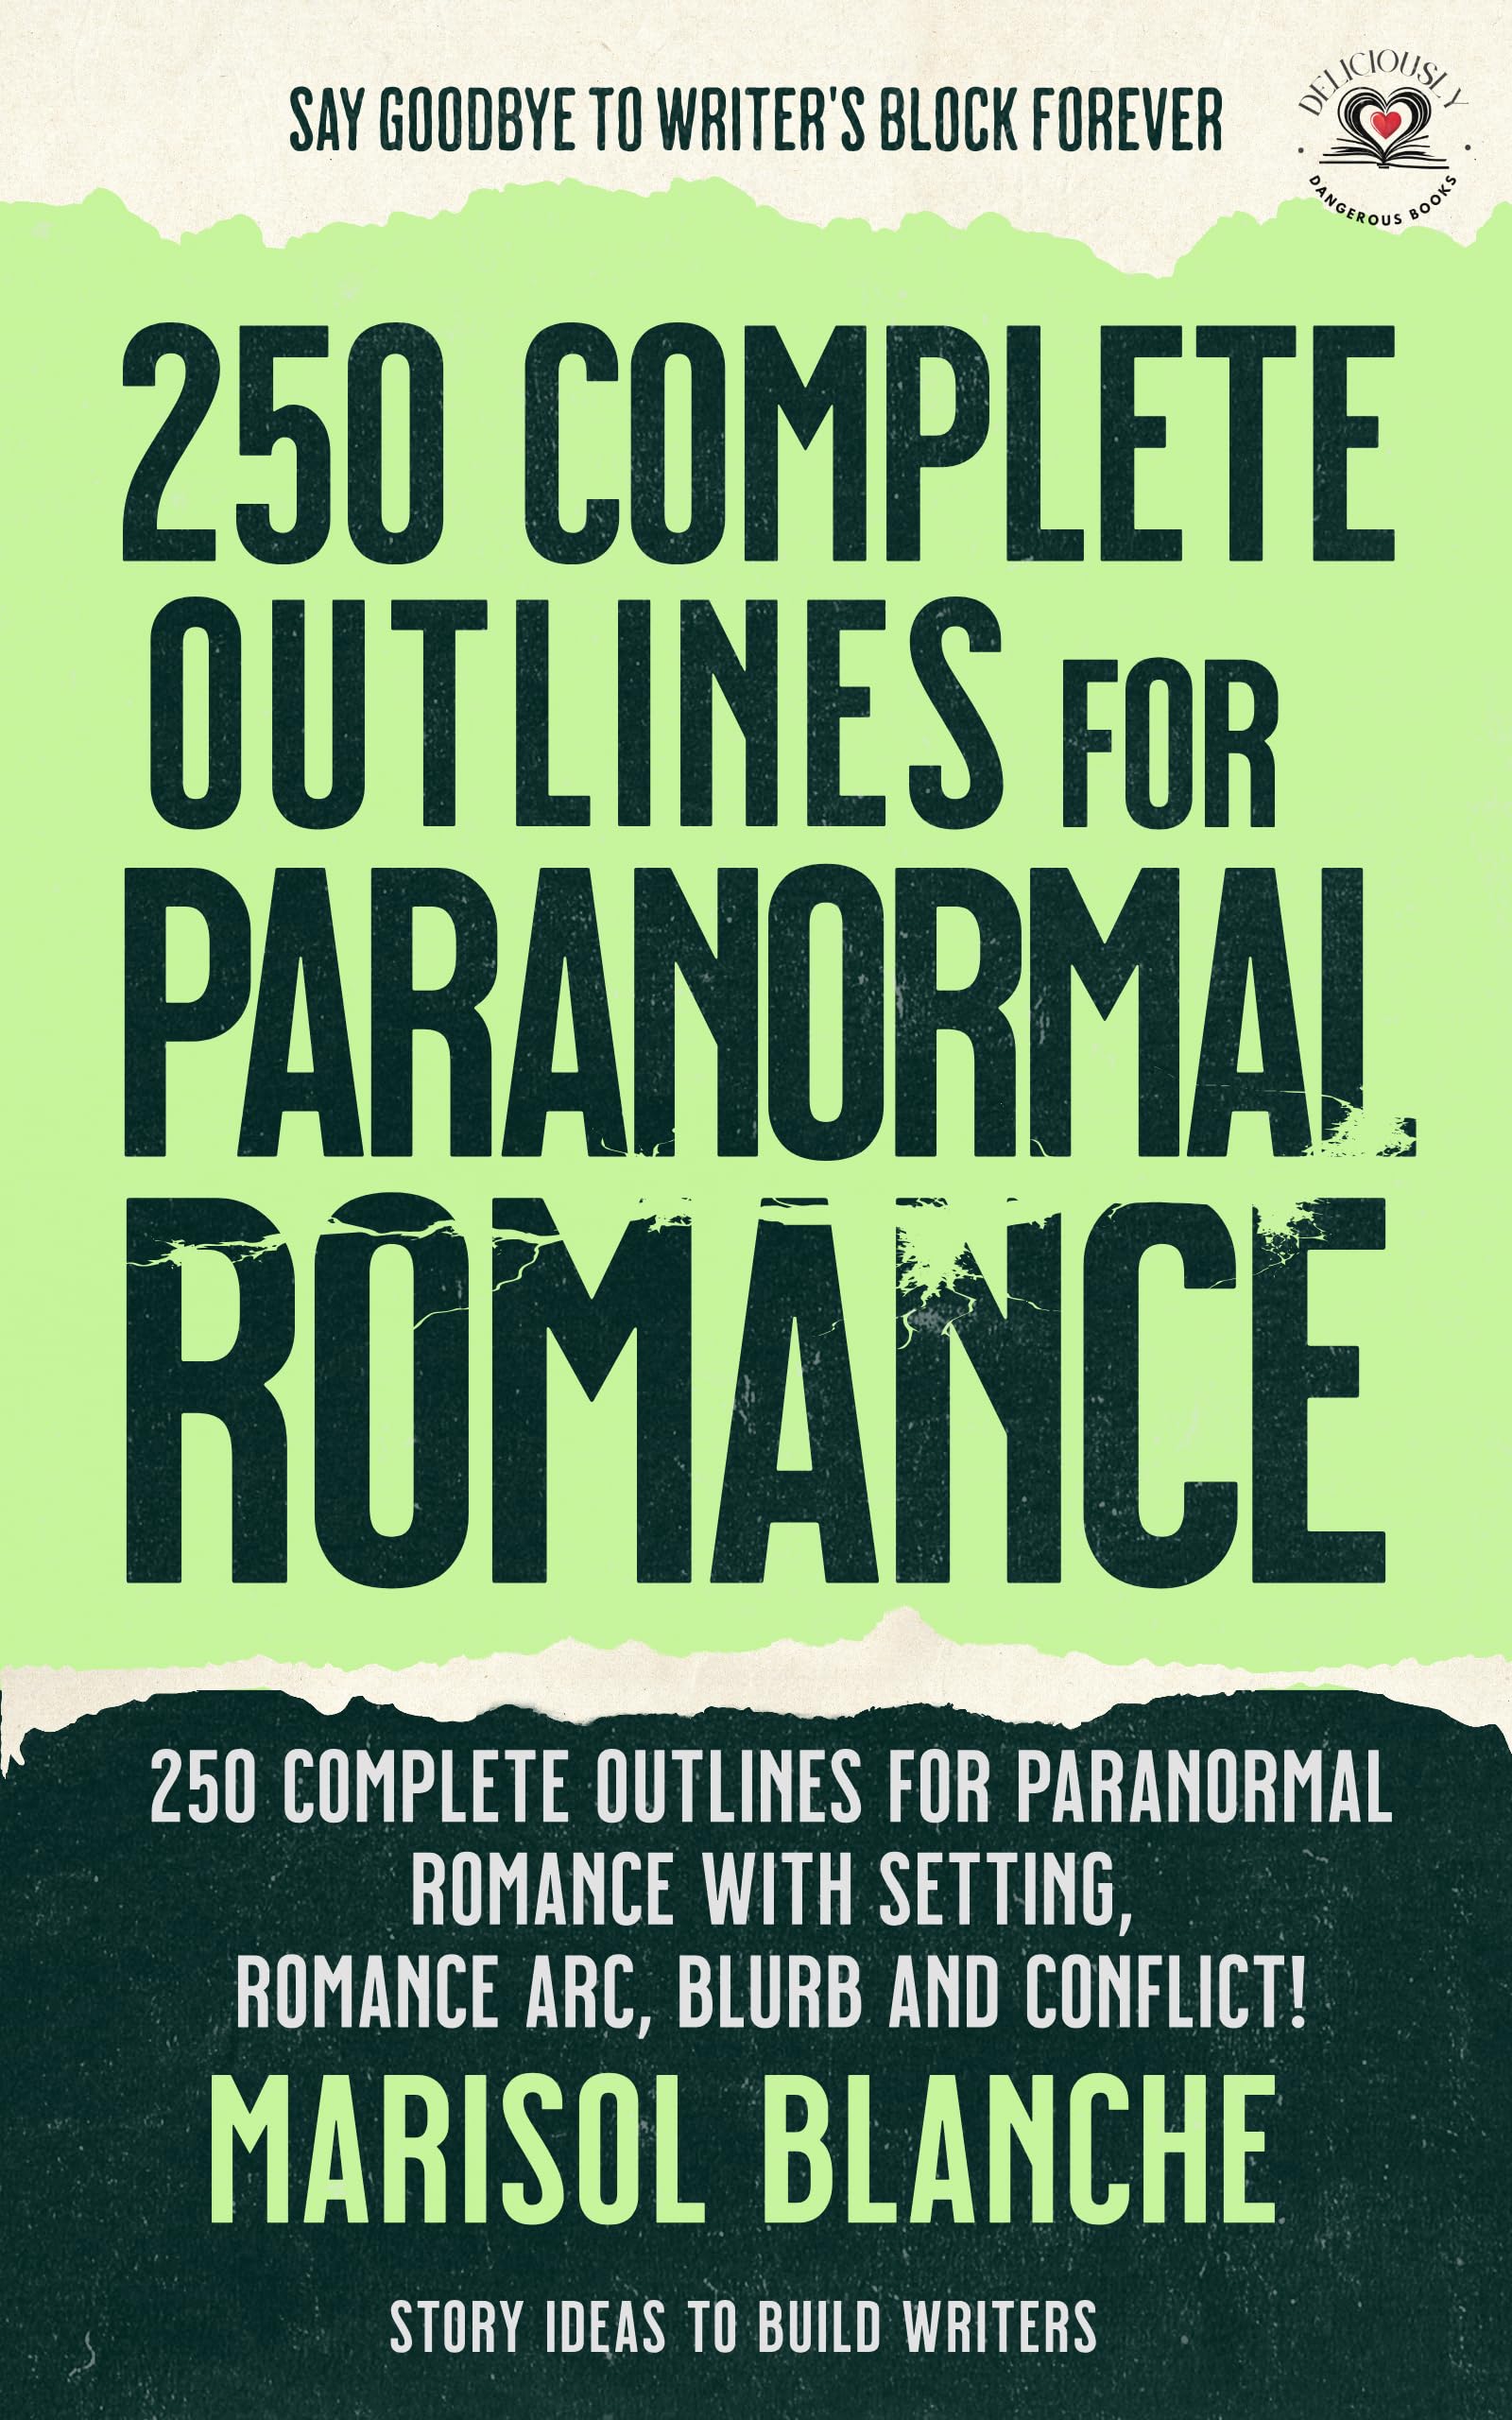 250 Complete Outlines for Paranormal Romance Novels: Story Ideas and Detailed Outlines with prompts, settings, blurbs, conflict, character development ... Romance Writer's Outline Handbooks)